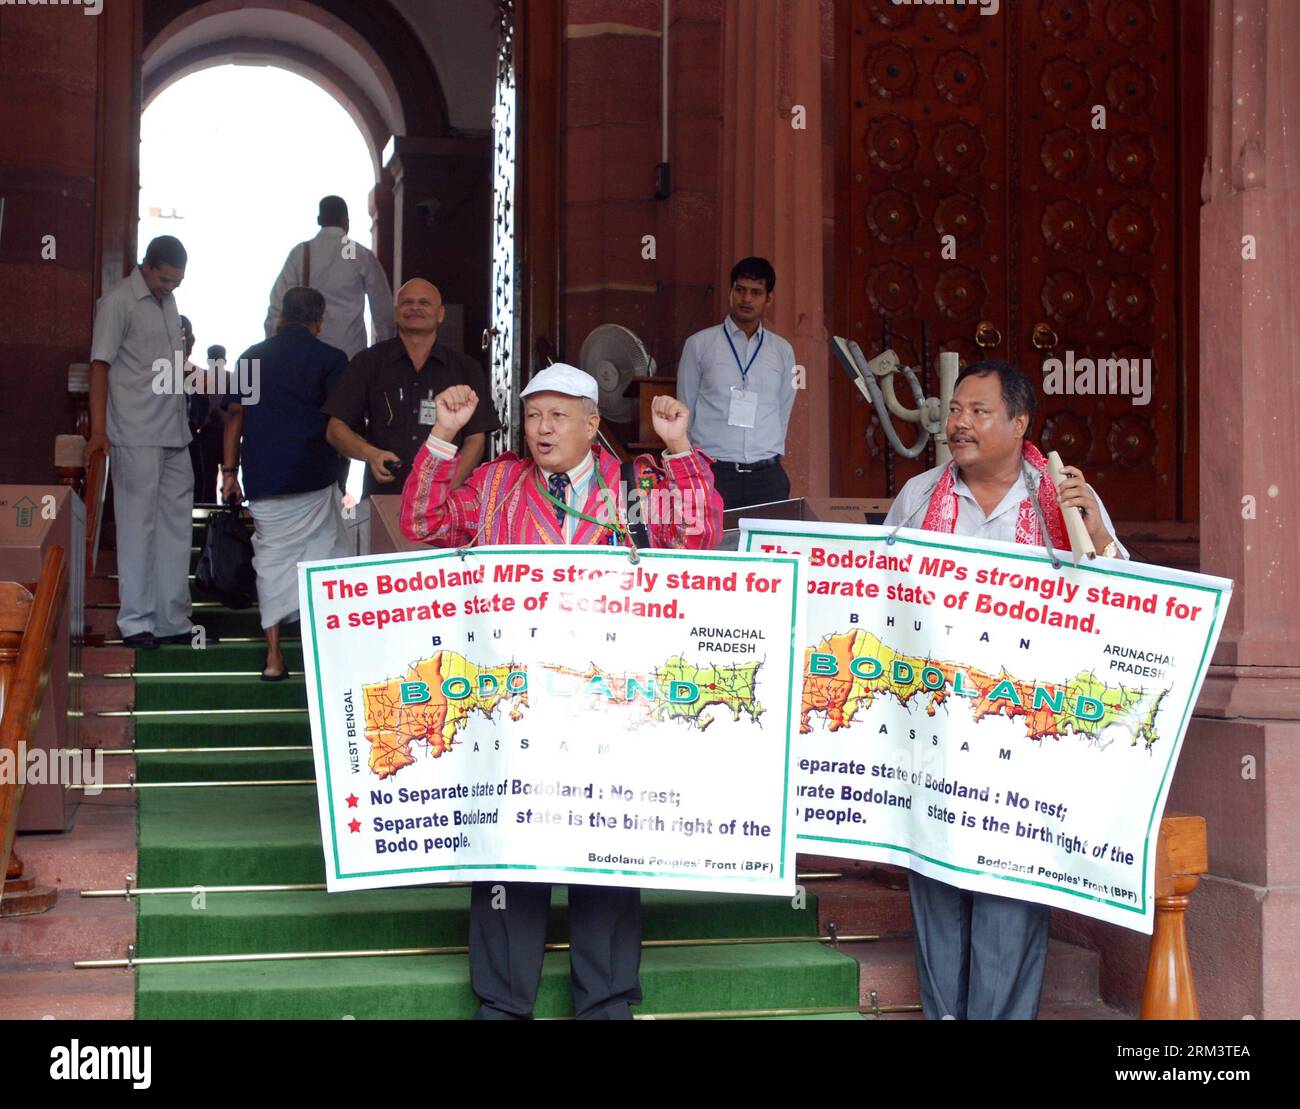 Bildnummer: 60321785  Datum: 05.08.2013  Copyright: imago/Xinhua (130805) -- NEW DELHI, Aug. 5, 2013 (Xinhua) -- Members of Parliament from Bodoland hold banners demanding a separate state in New Delhi, India, Aug. 5, 2013. Indian Parliament saw disruptions on the first of its monsoon session which opened Monday over the setting up of a new state, which has caused widespread controversy in the country. (Xinhua/Partha Sarkar) INDIA-NEW DELHI-MEMBER OF PARLIAMENT PUBLICATIONxNOTxINxCHN Gesellschaft x2x xkg 2013 quer  o0 Politik Demo Protest     60321785 Date 05 08 2013 Copyright Imago XINHUA  Ne Stock Photo